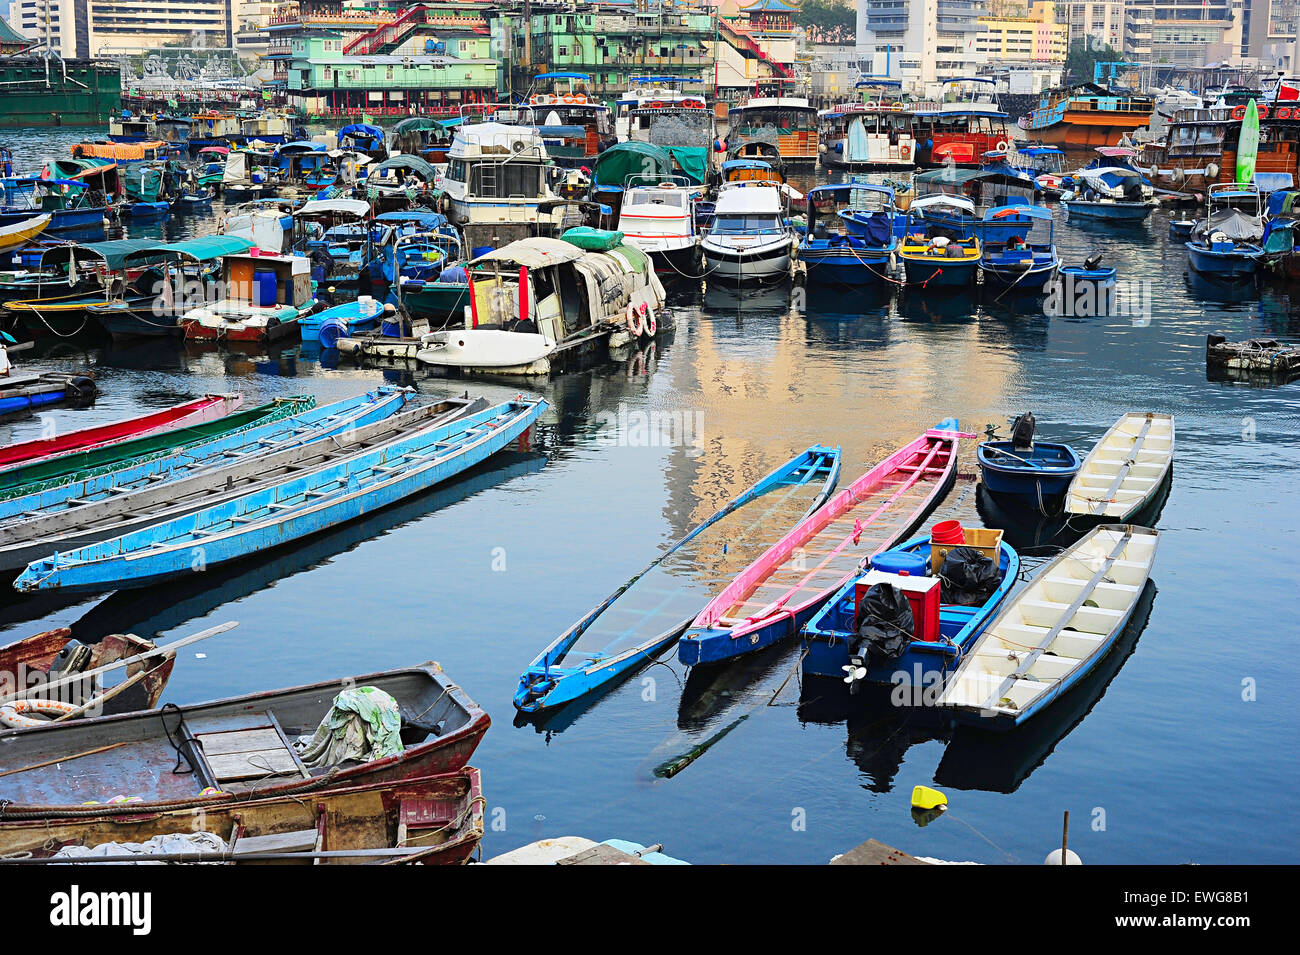 Aberdeen - is a famous tourists destination because of its floating villages and floating seafood restaurants. Hong Kong Stock Photo